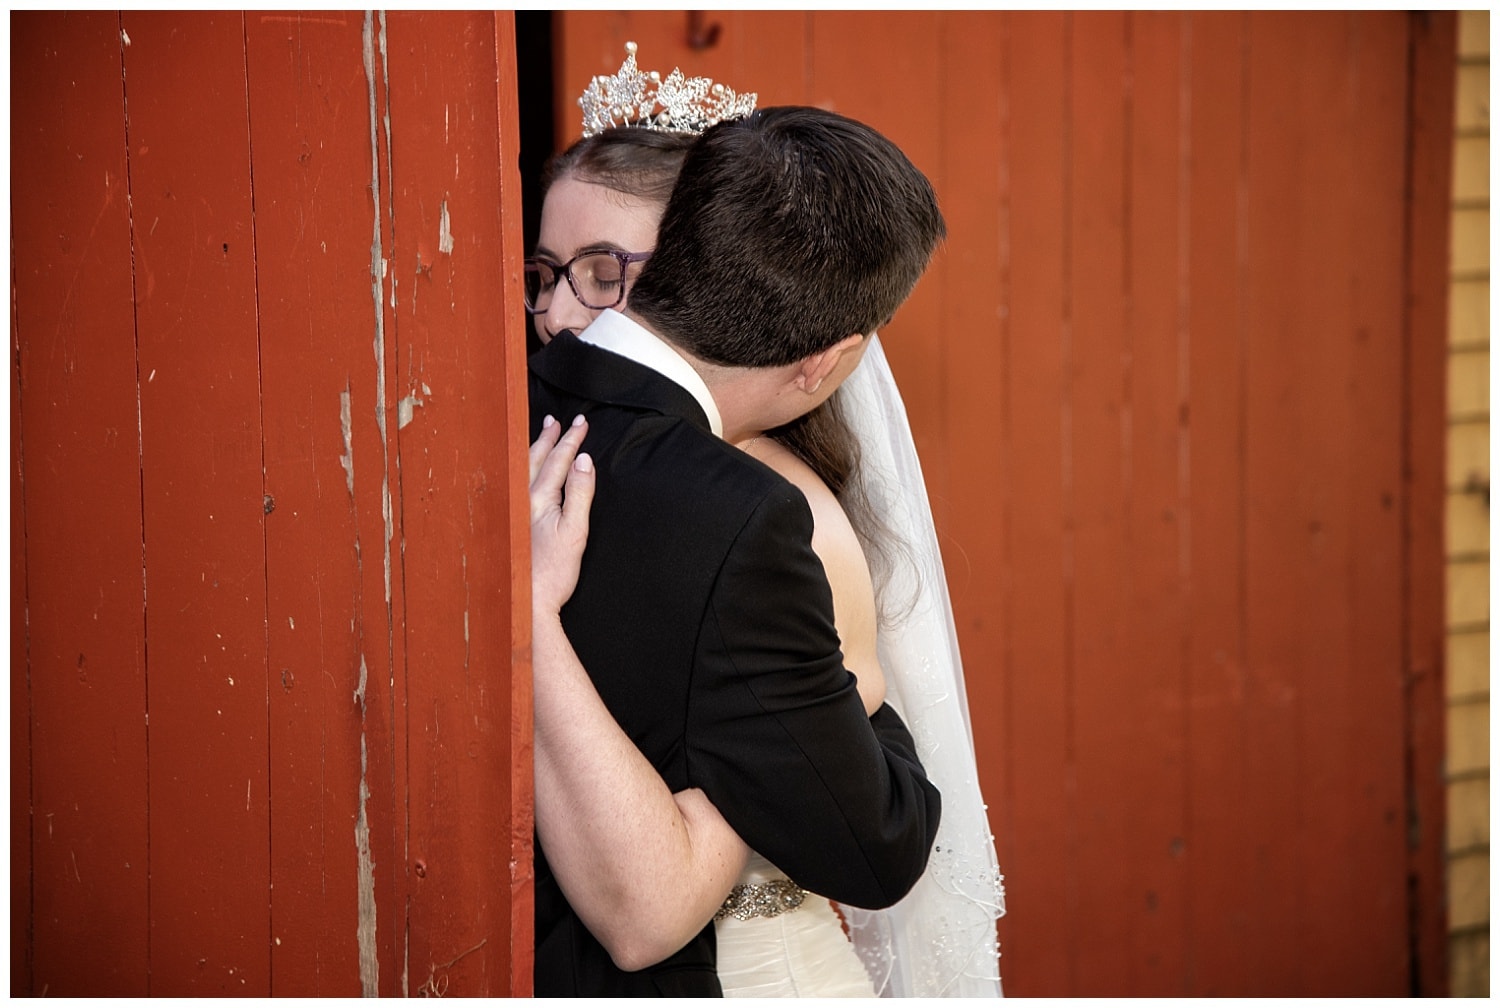 The bride and groom have a moment together after their first look at the Kinley Farm's barn in Lunenburg, NS.